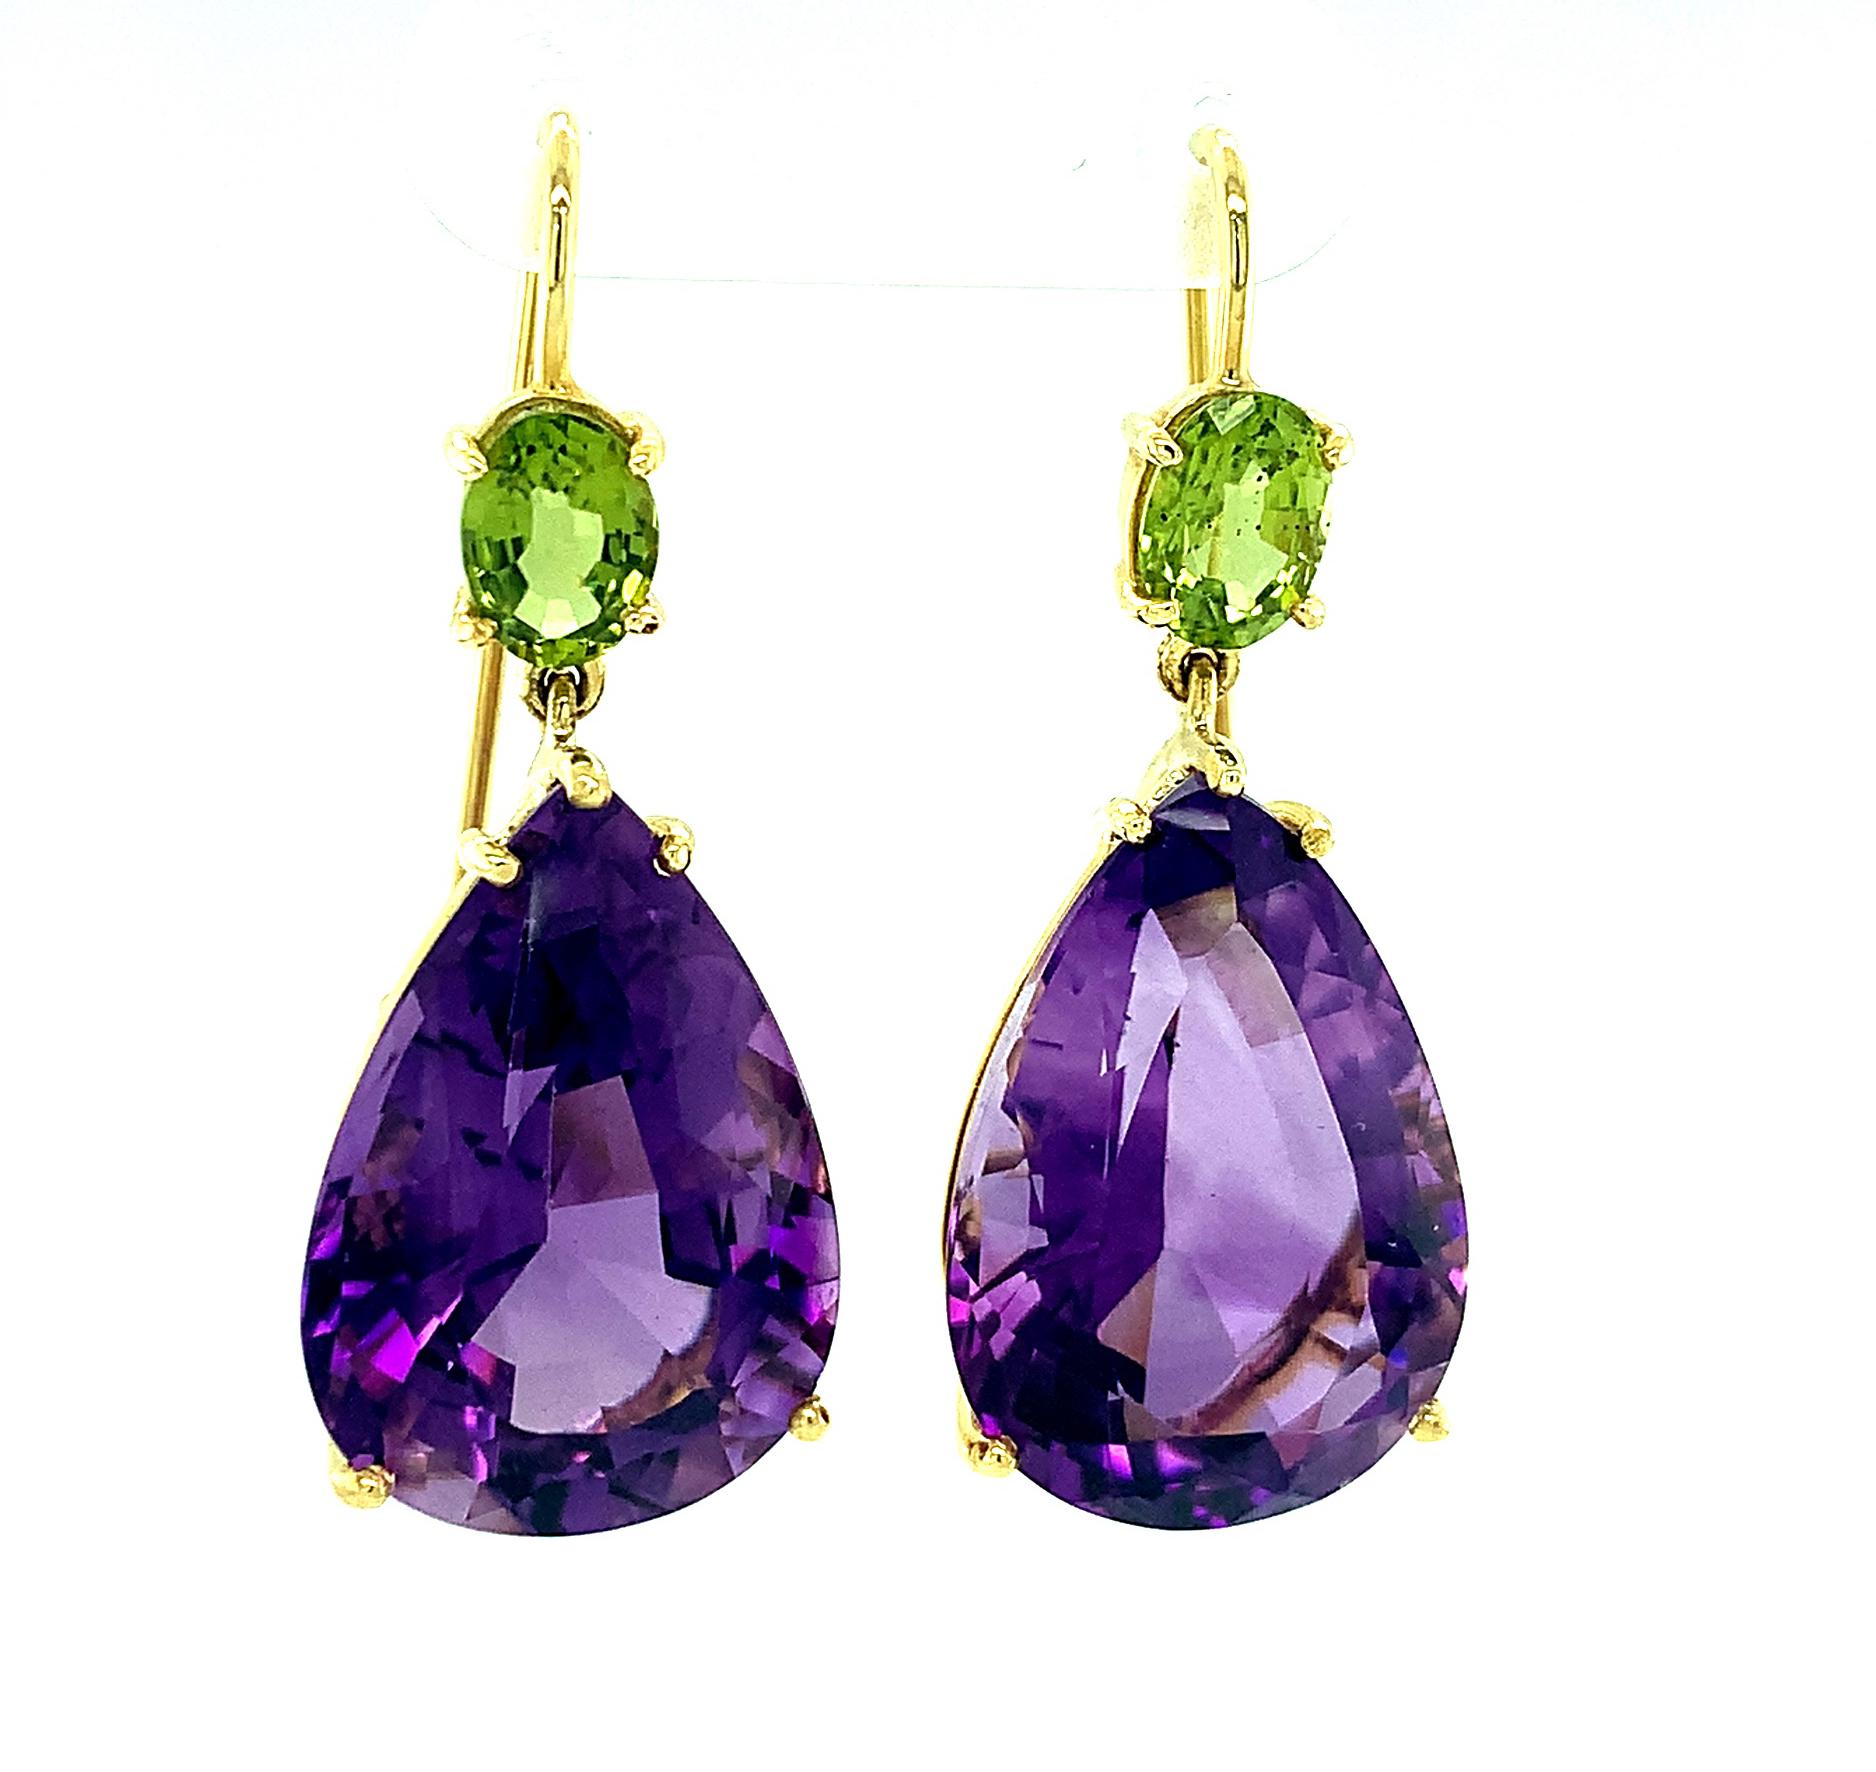 These big, beautiful drop earrings are bold and happy with the combination of huge, violet-purple amethysts and vibrant lime-green peridots. Dangling from 18k yellow gold wires, these fun are comfortable and definite attention-grabbers! Treat